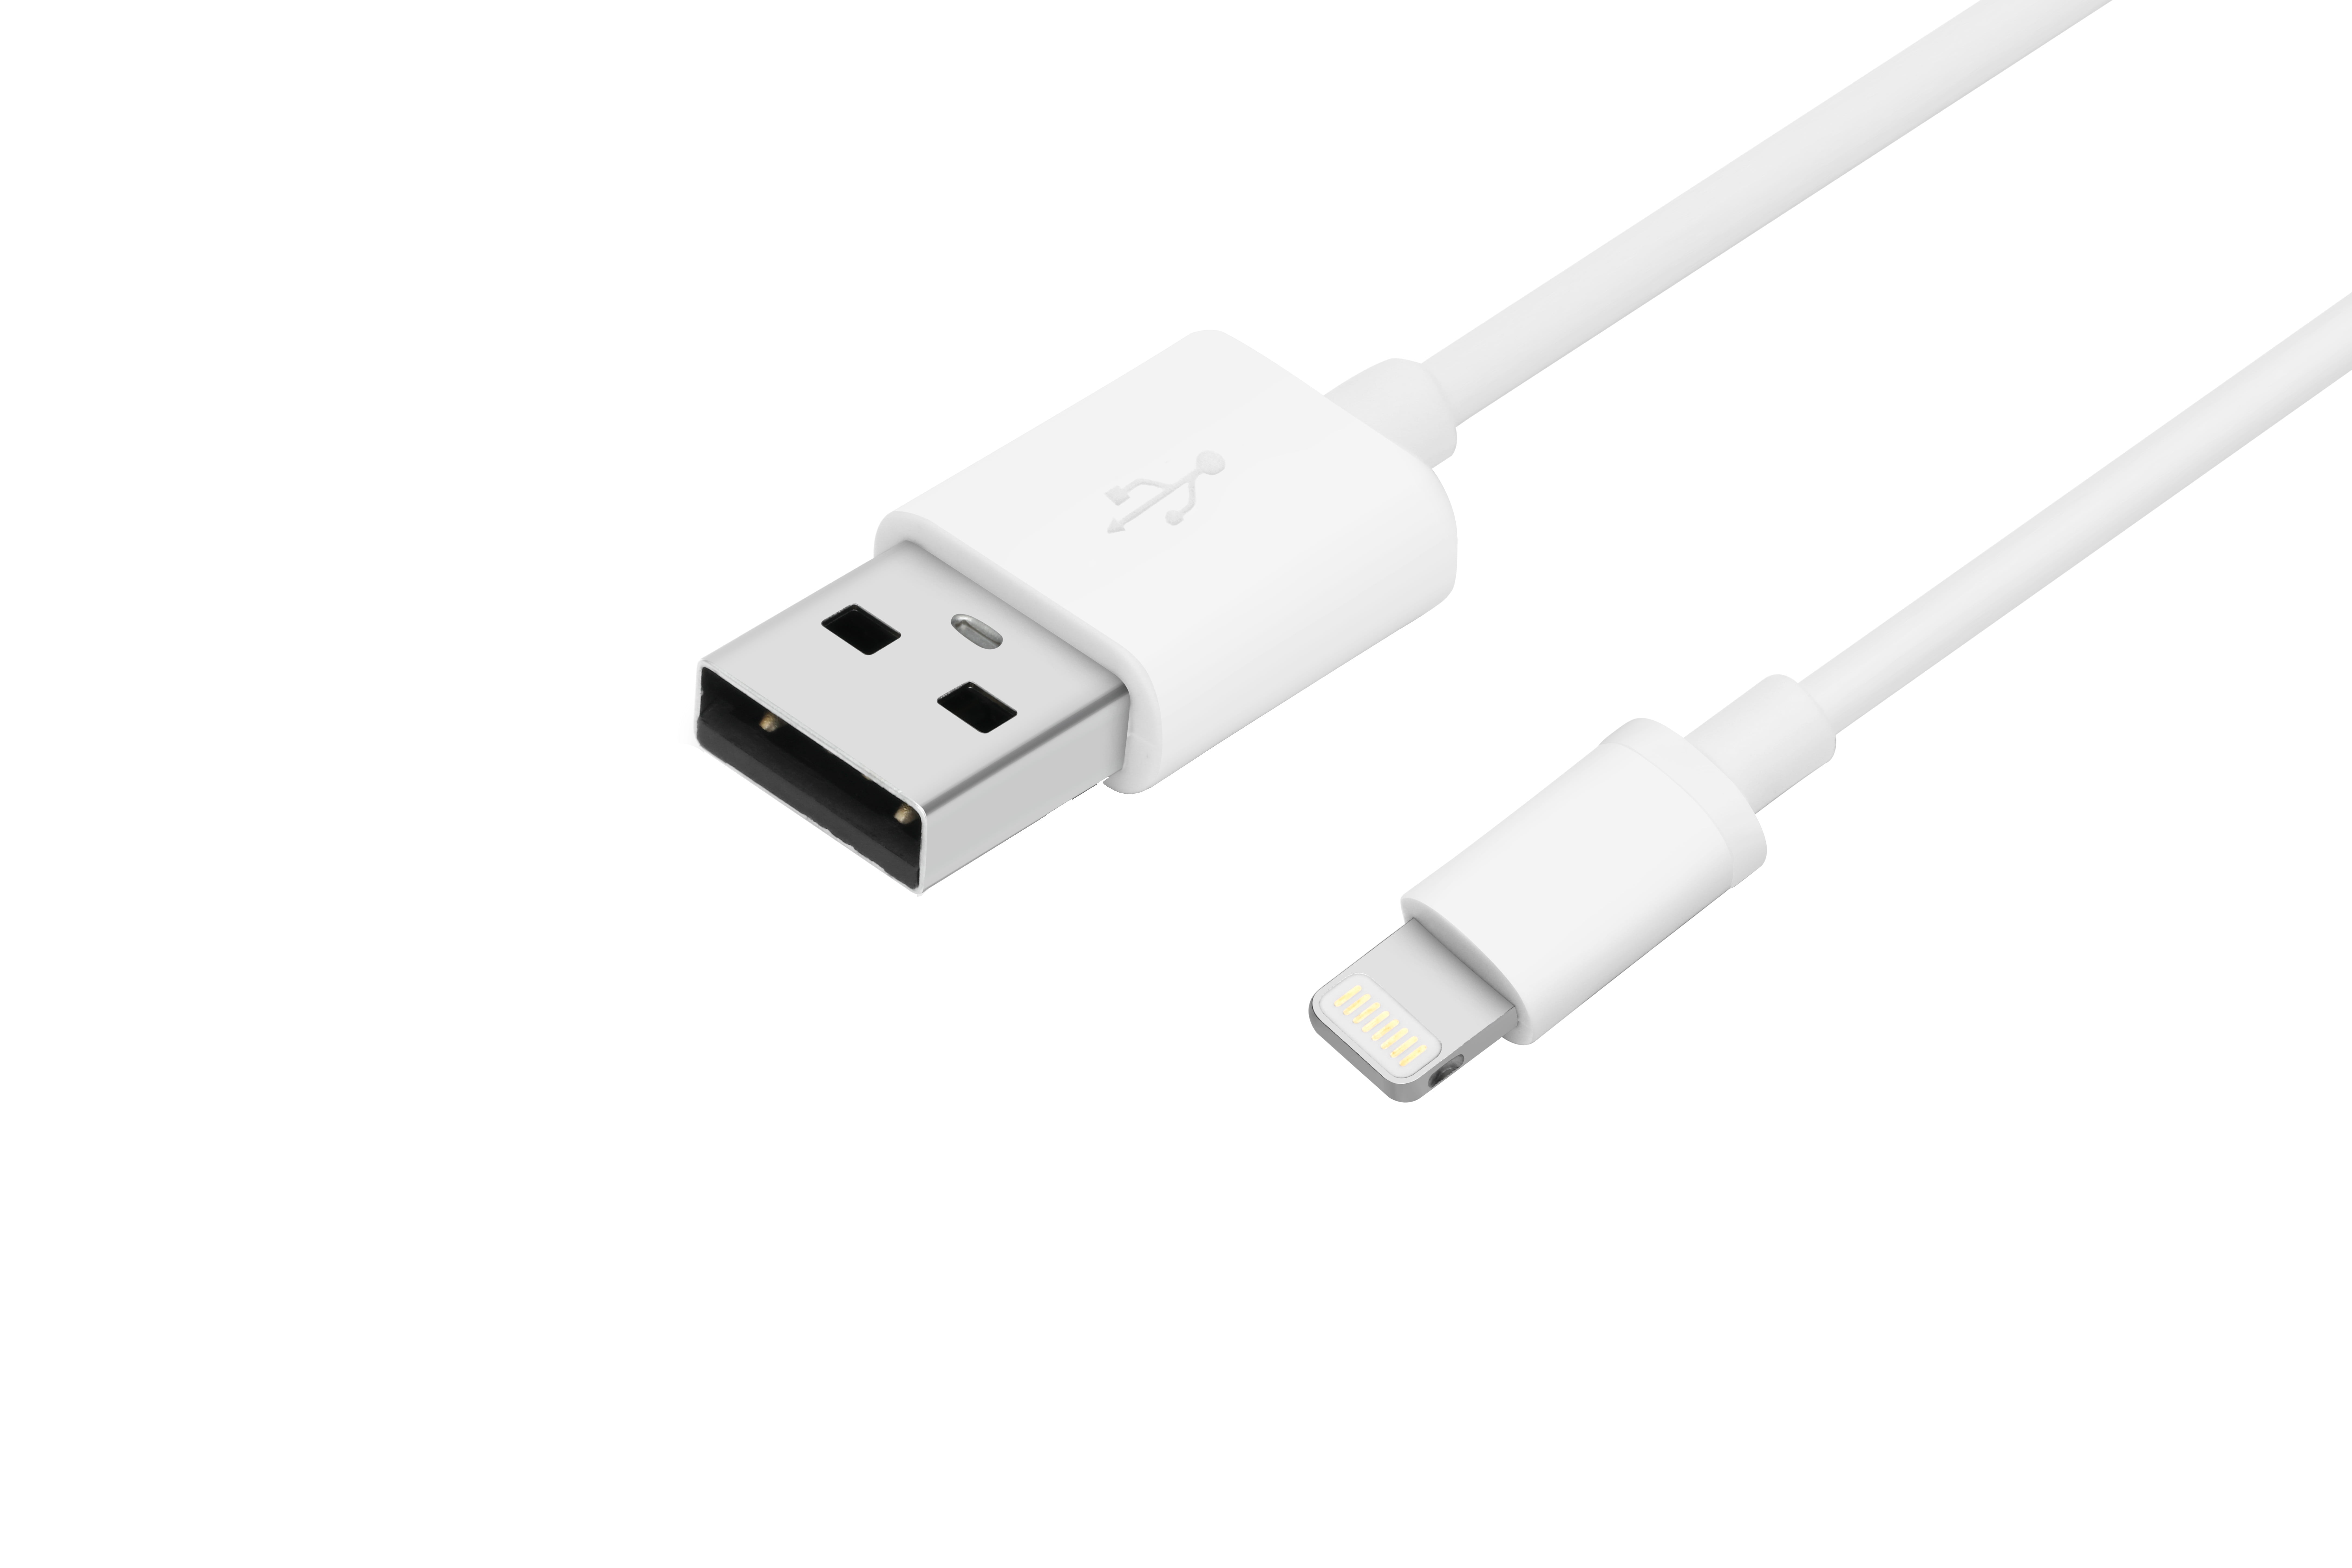 Ven-Dens White USB-C to Lightning 2m Charge and Sync Cable